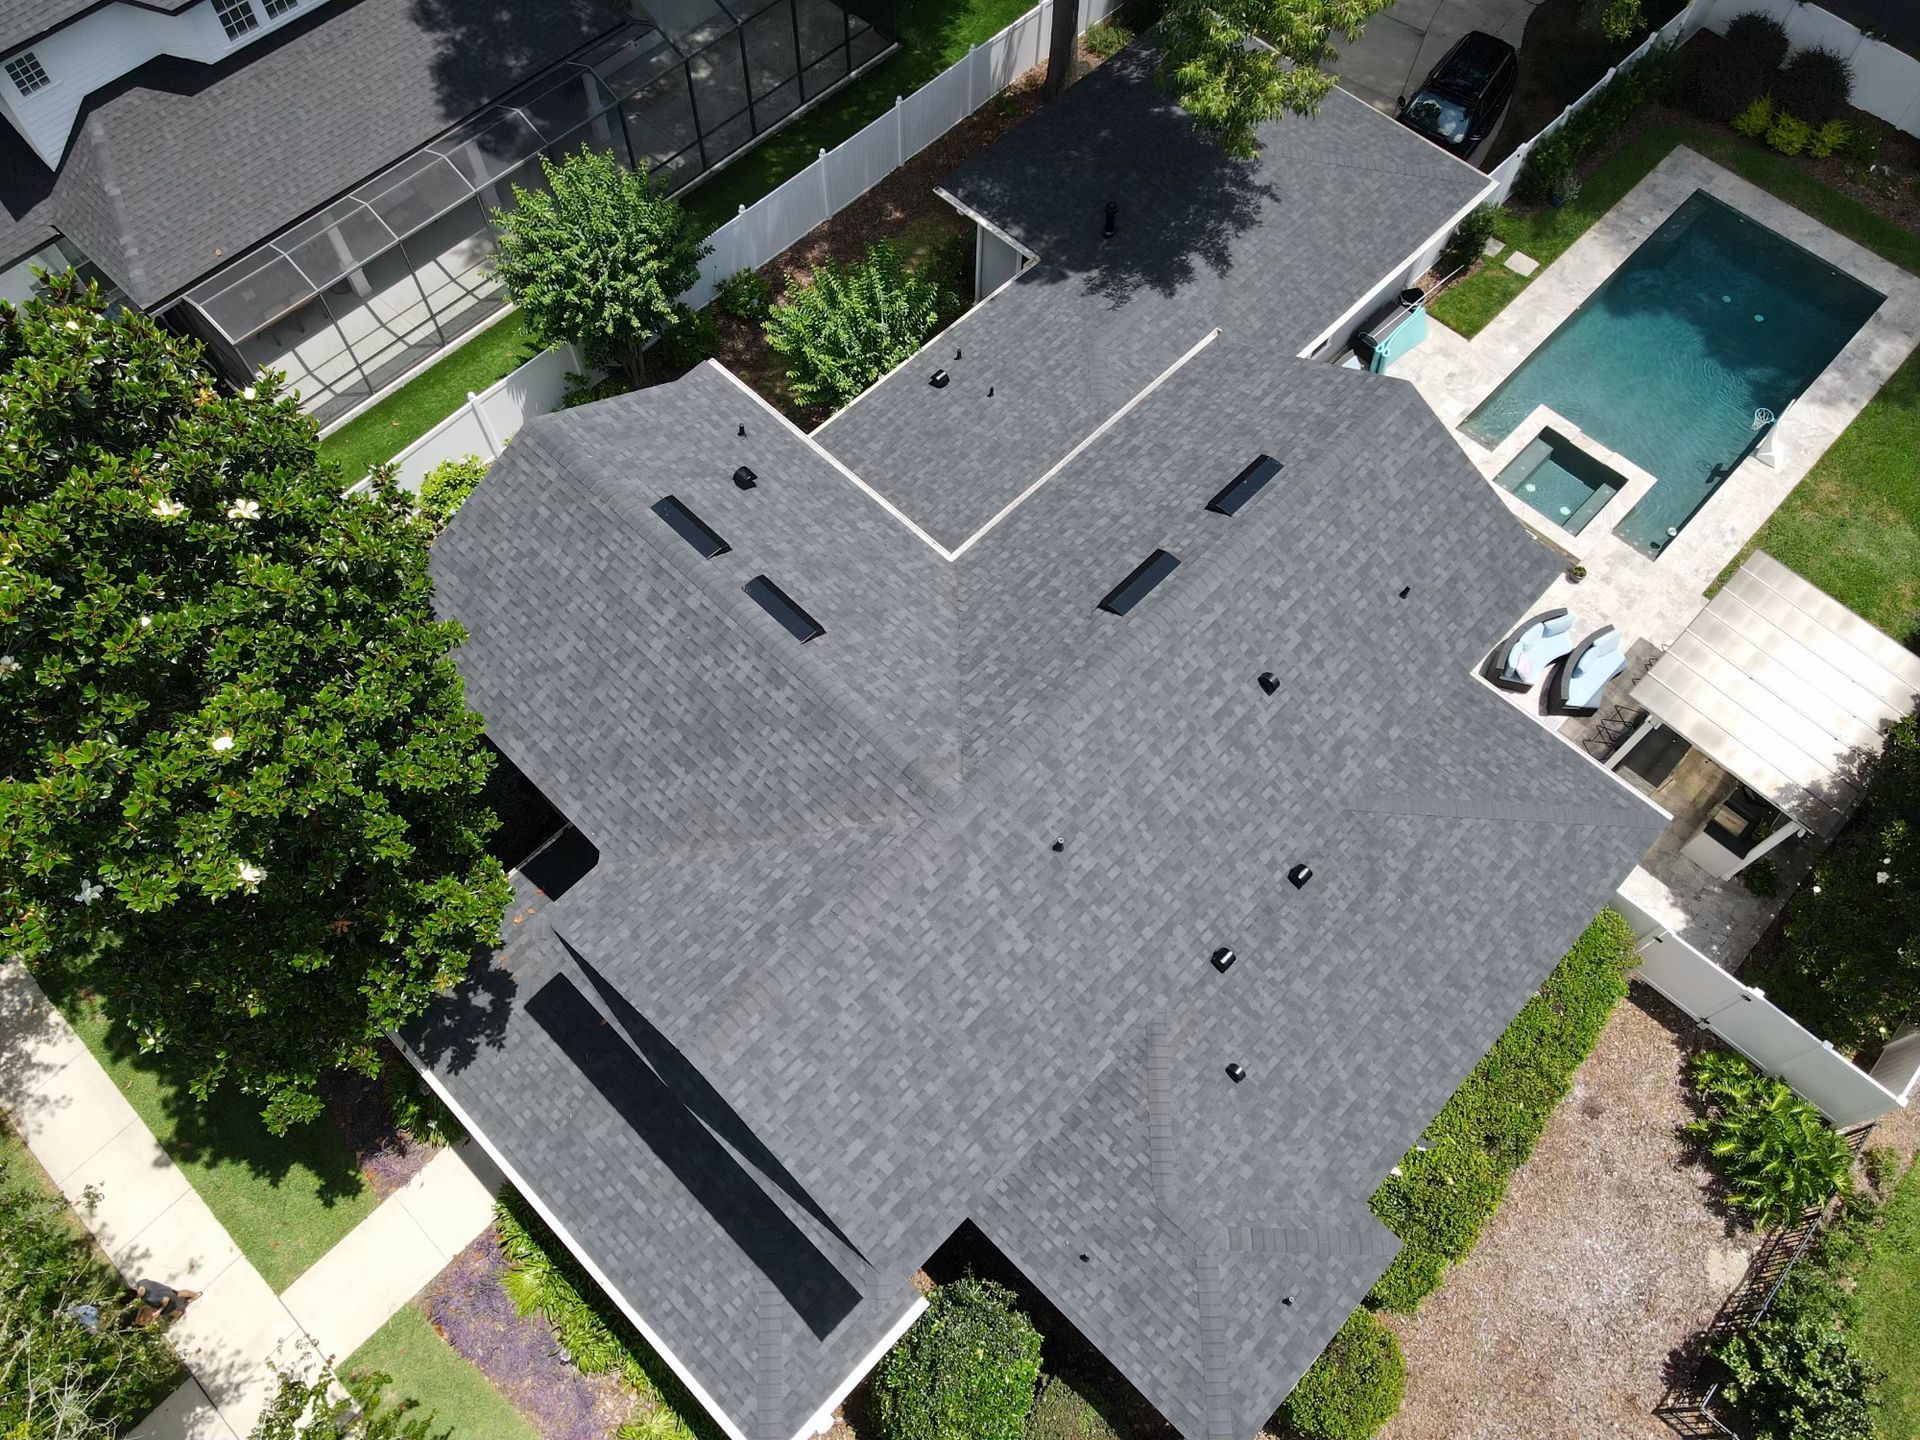 An aerial view of a house with a pool in the backyard